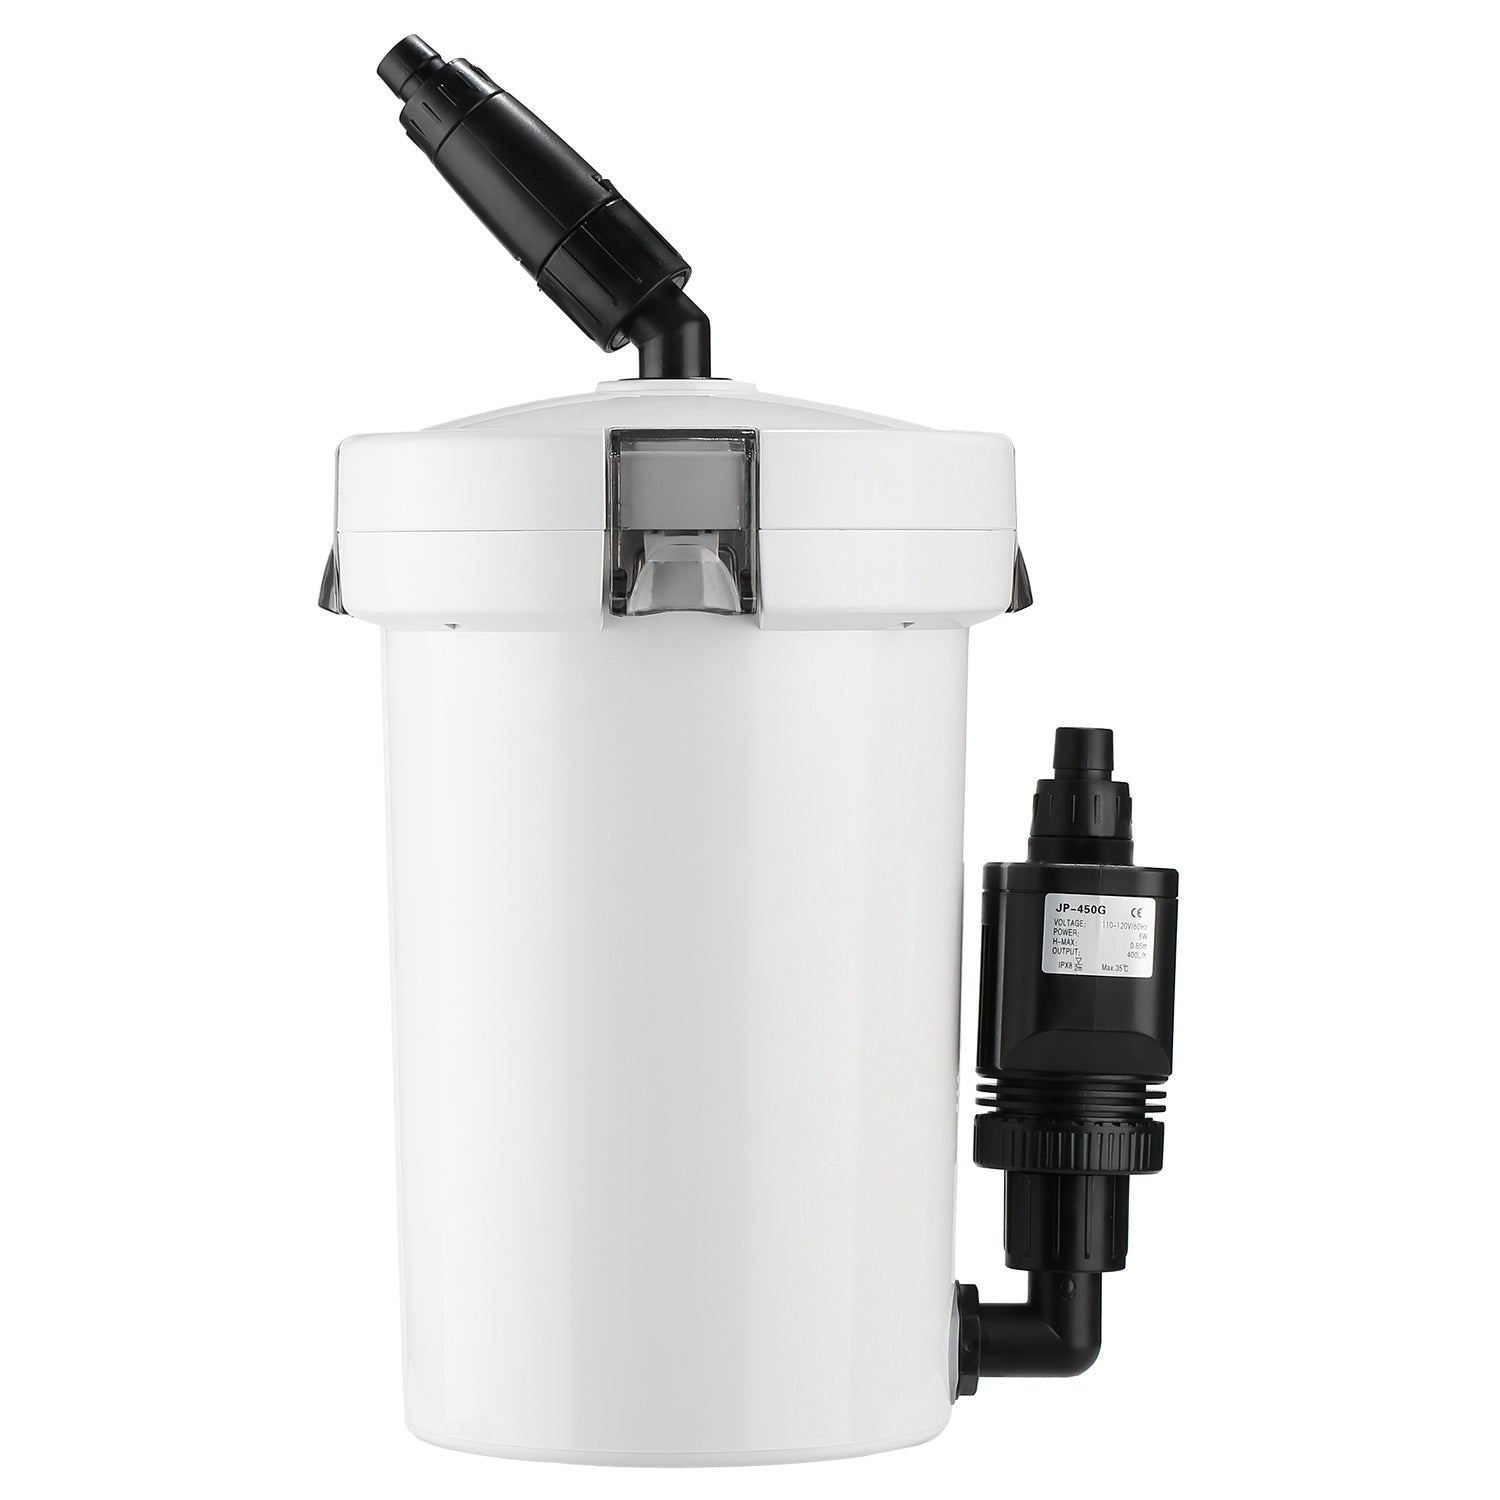 3-Stage External Canister Filter for 28 Gallon Aquarium Fish Tank 105gph 6W Easy Installation Silent - WoodPoly.com